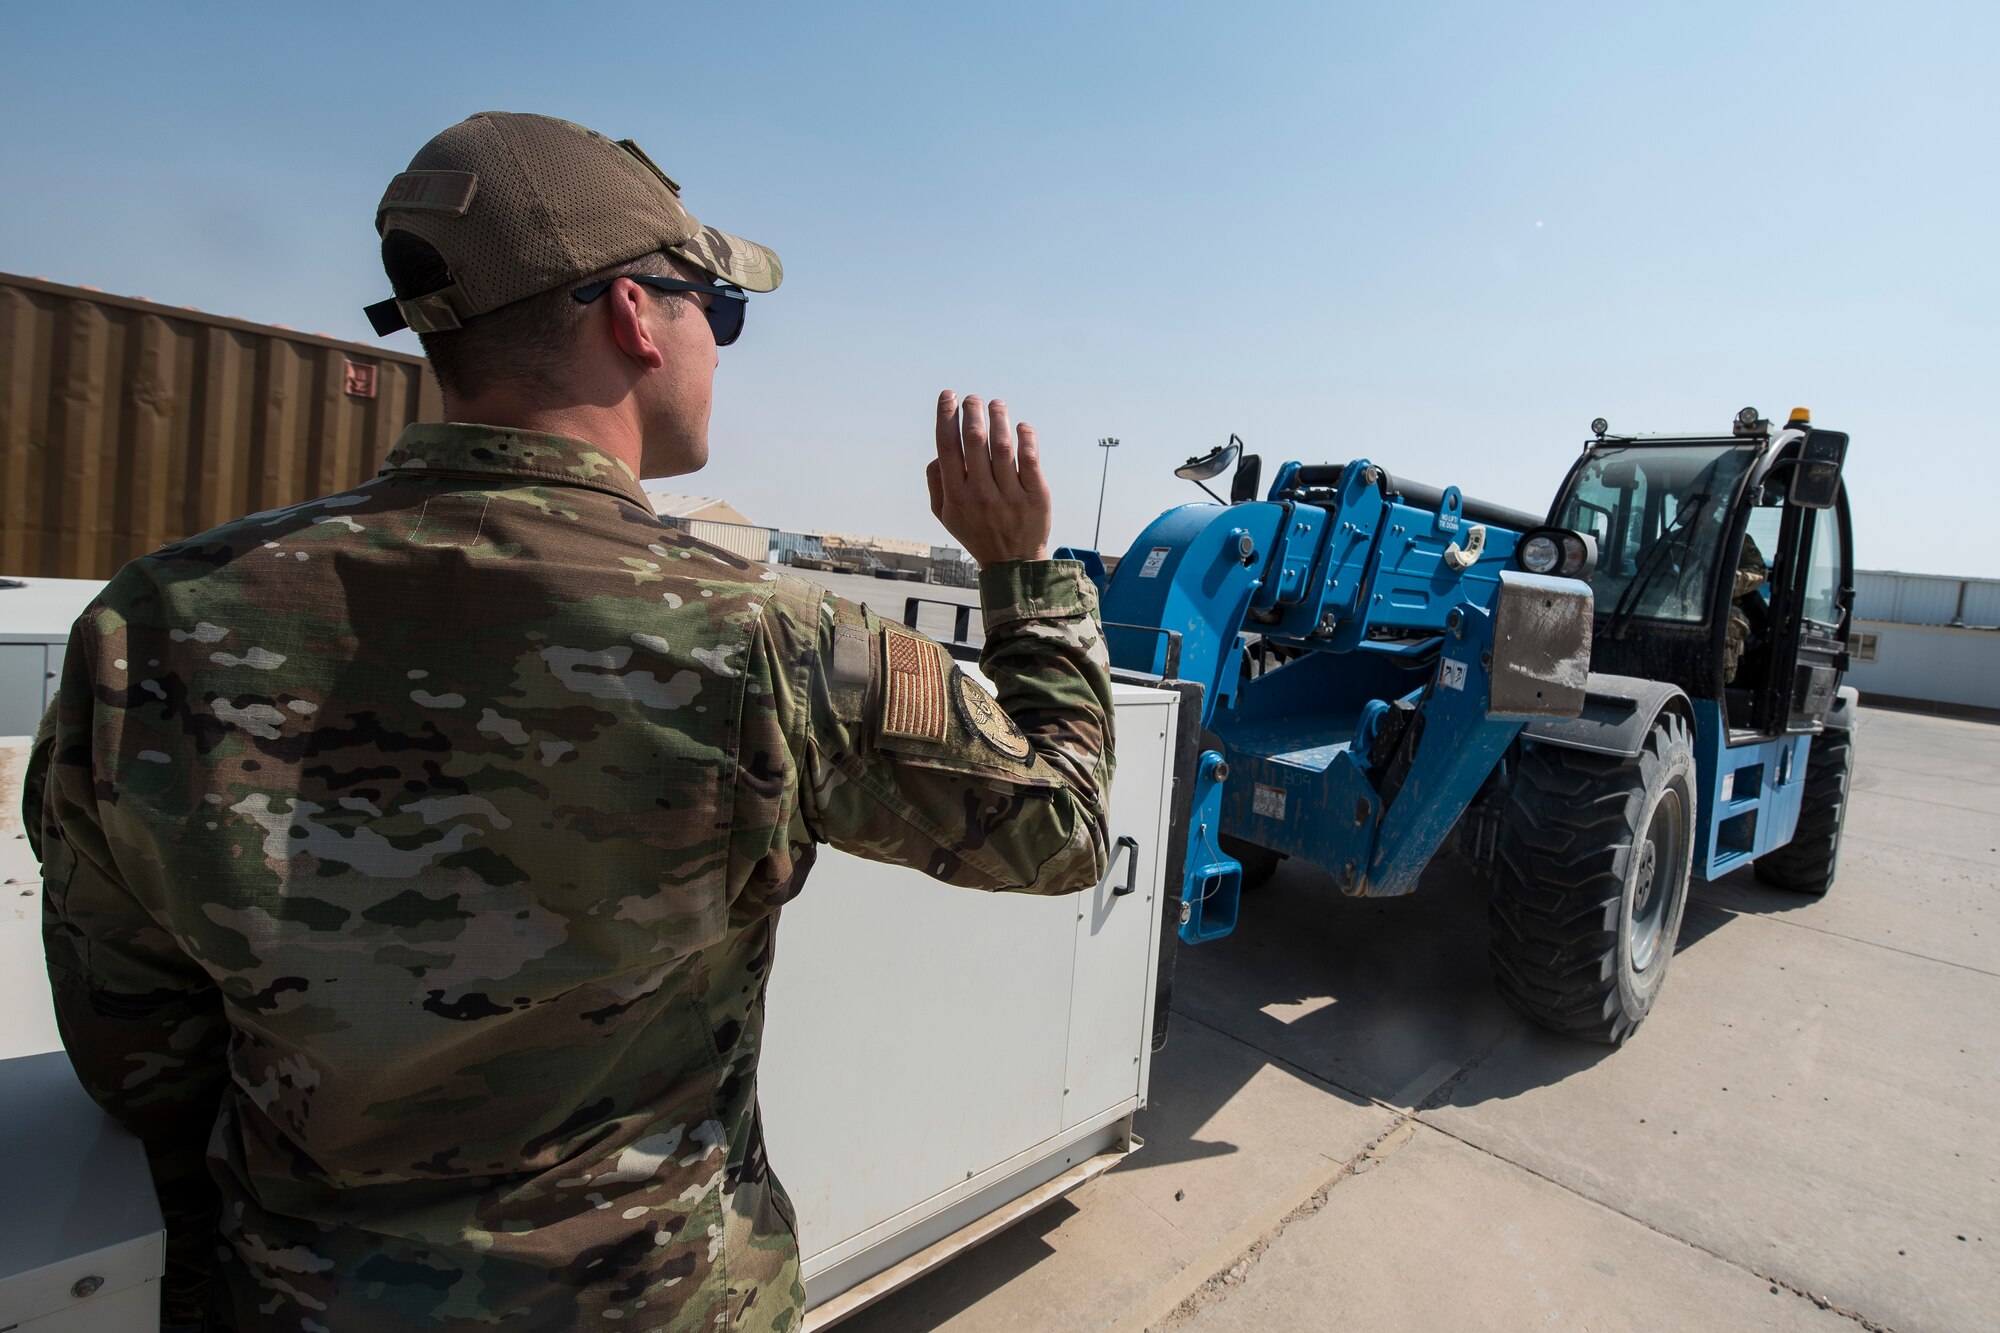 Senior Airman Patrick Lonski and Master Sgt. Brian Encarnacion, 386th Expeditionary Civil Engineer Squadron material control journeyman and NCO-in-charge (respectively), move heating, ventilation and air-conditioning units at Ali Al Salem Air Base, Kuwait, Sept. 6, 2019. These specialists ensure every asset--from paper clips to multimillion-dollar machinery--is accounted for. (U.S. Air Force photo by Senior Airman Lane T. Plummer)